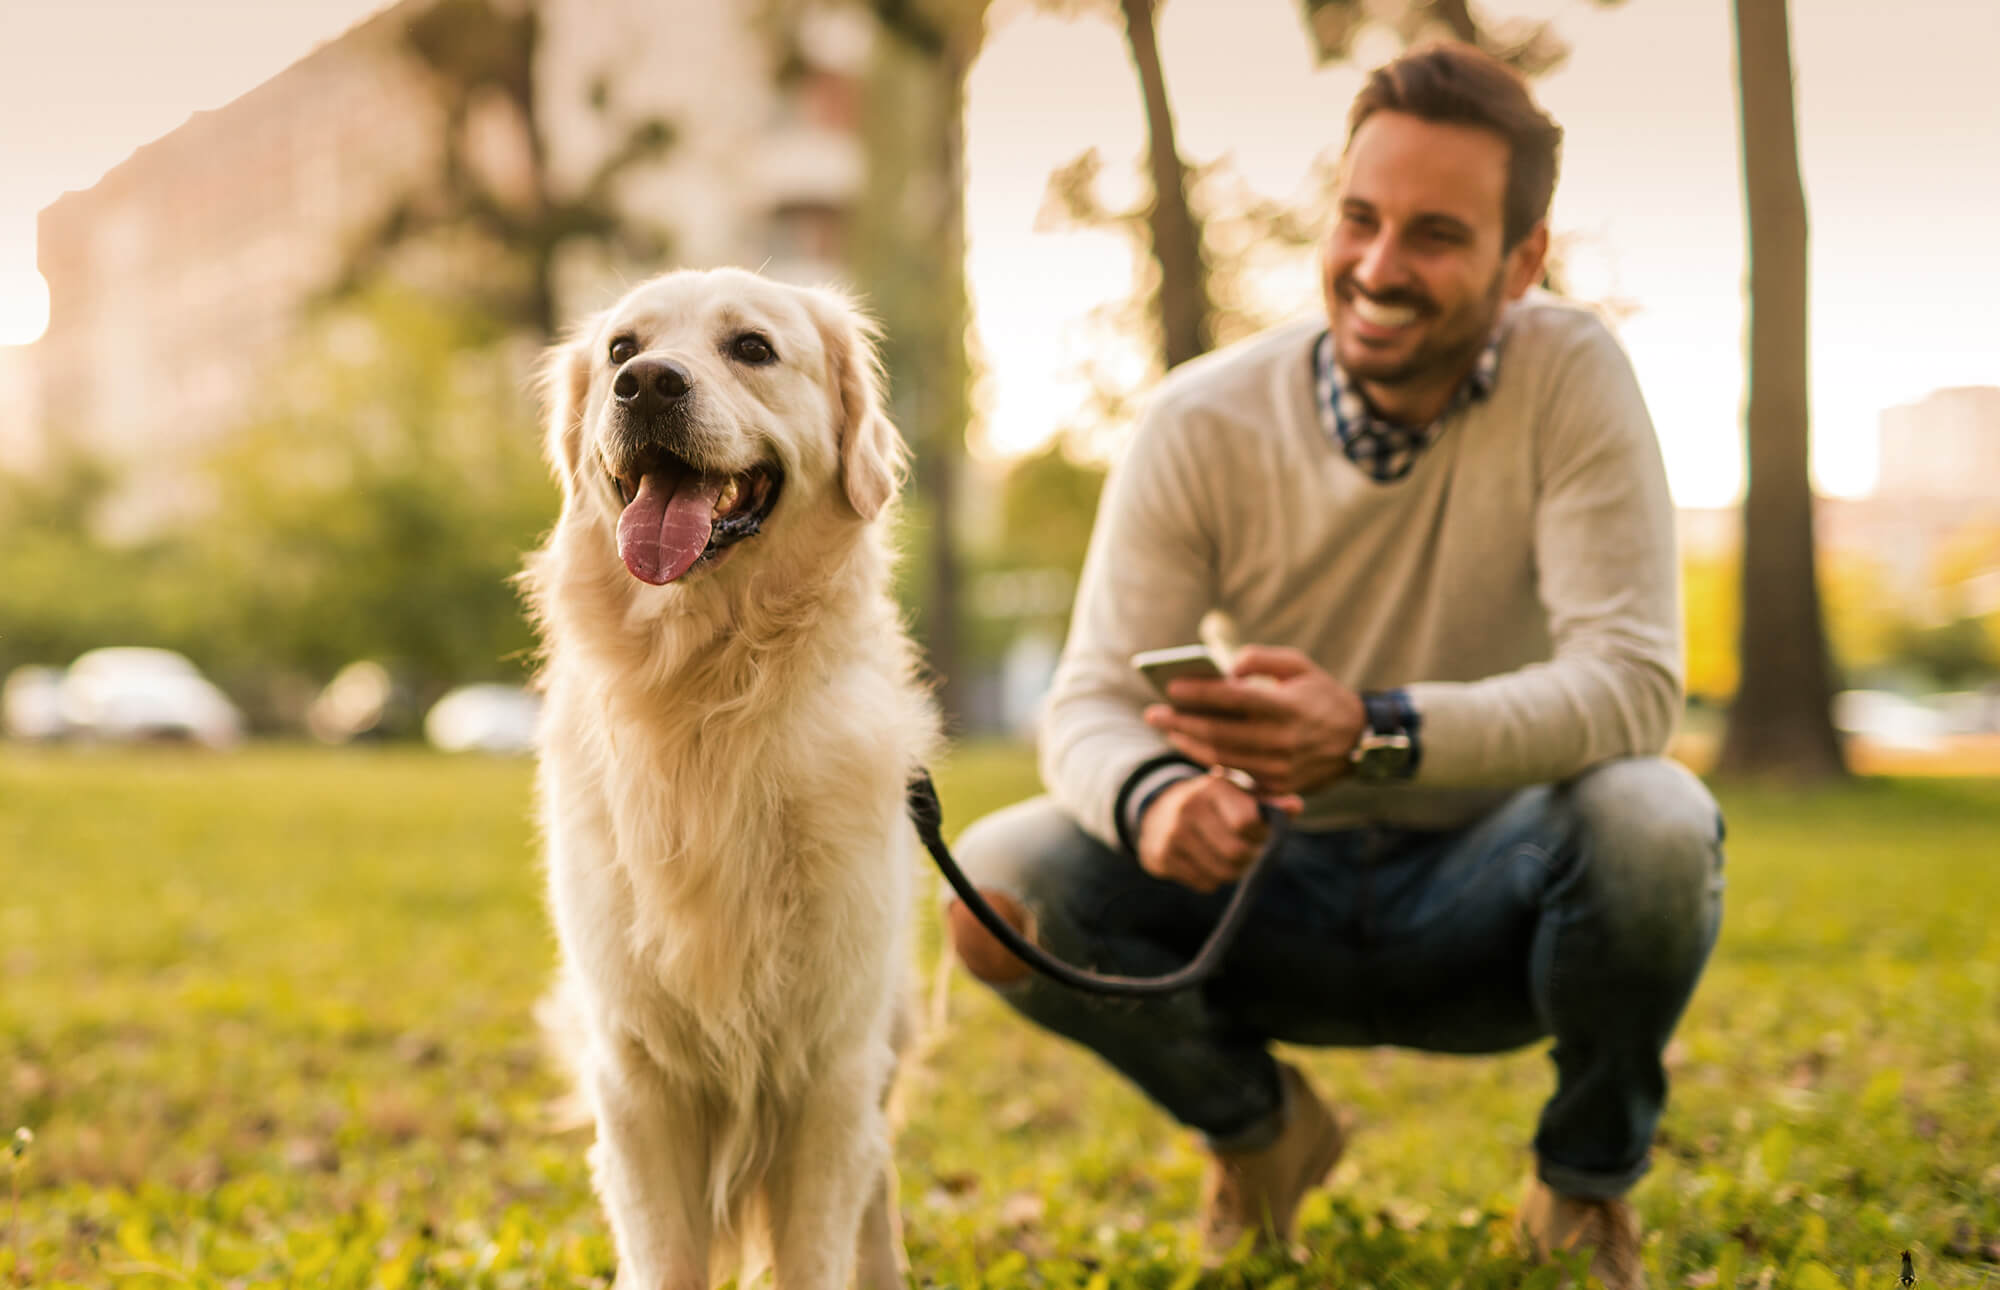 Image of person kneeling while smiling at his dog in a park.